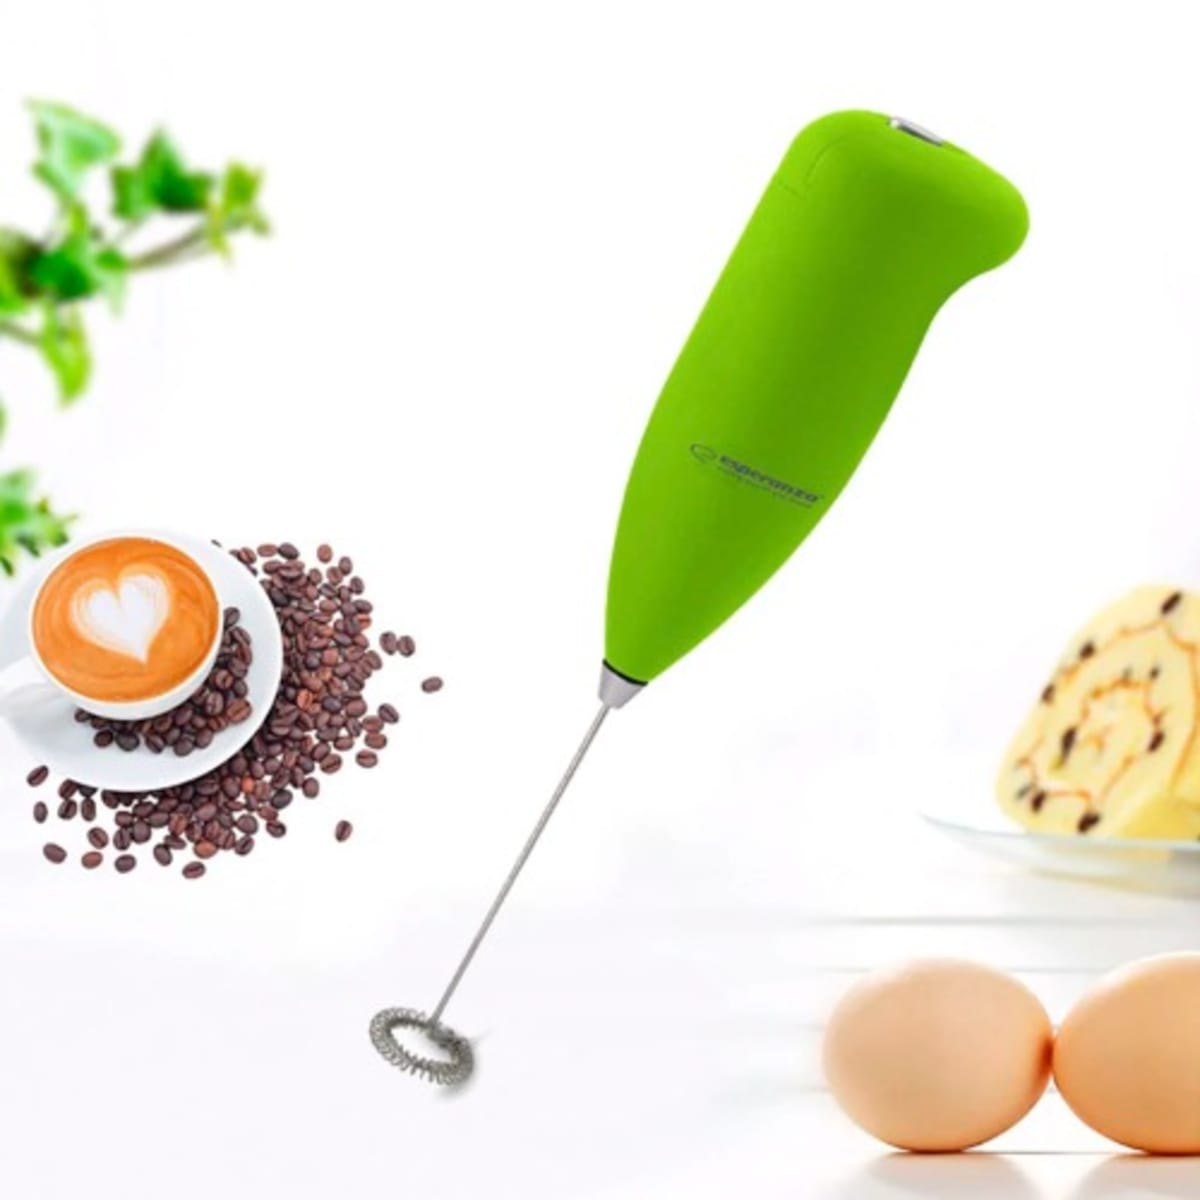 Handheld Milk Frothier - Mixer For Coffee - Smoothie - Latte - Matcha